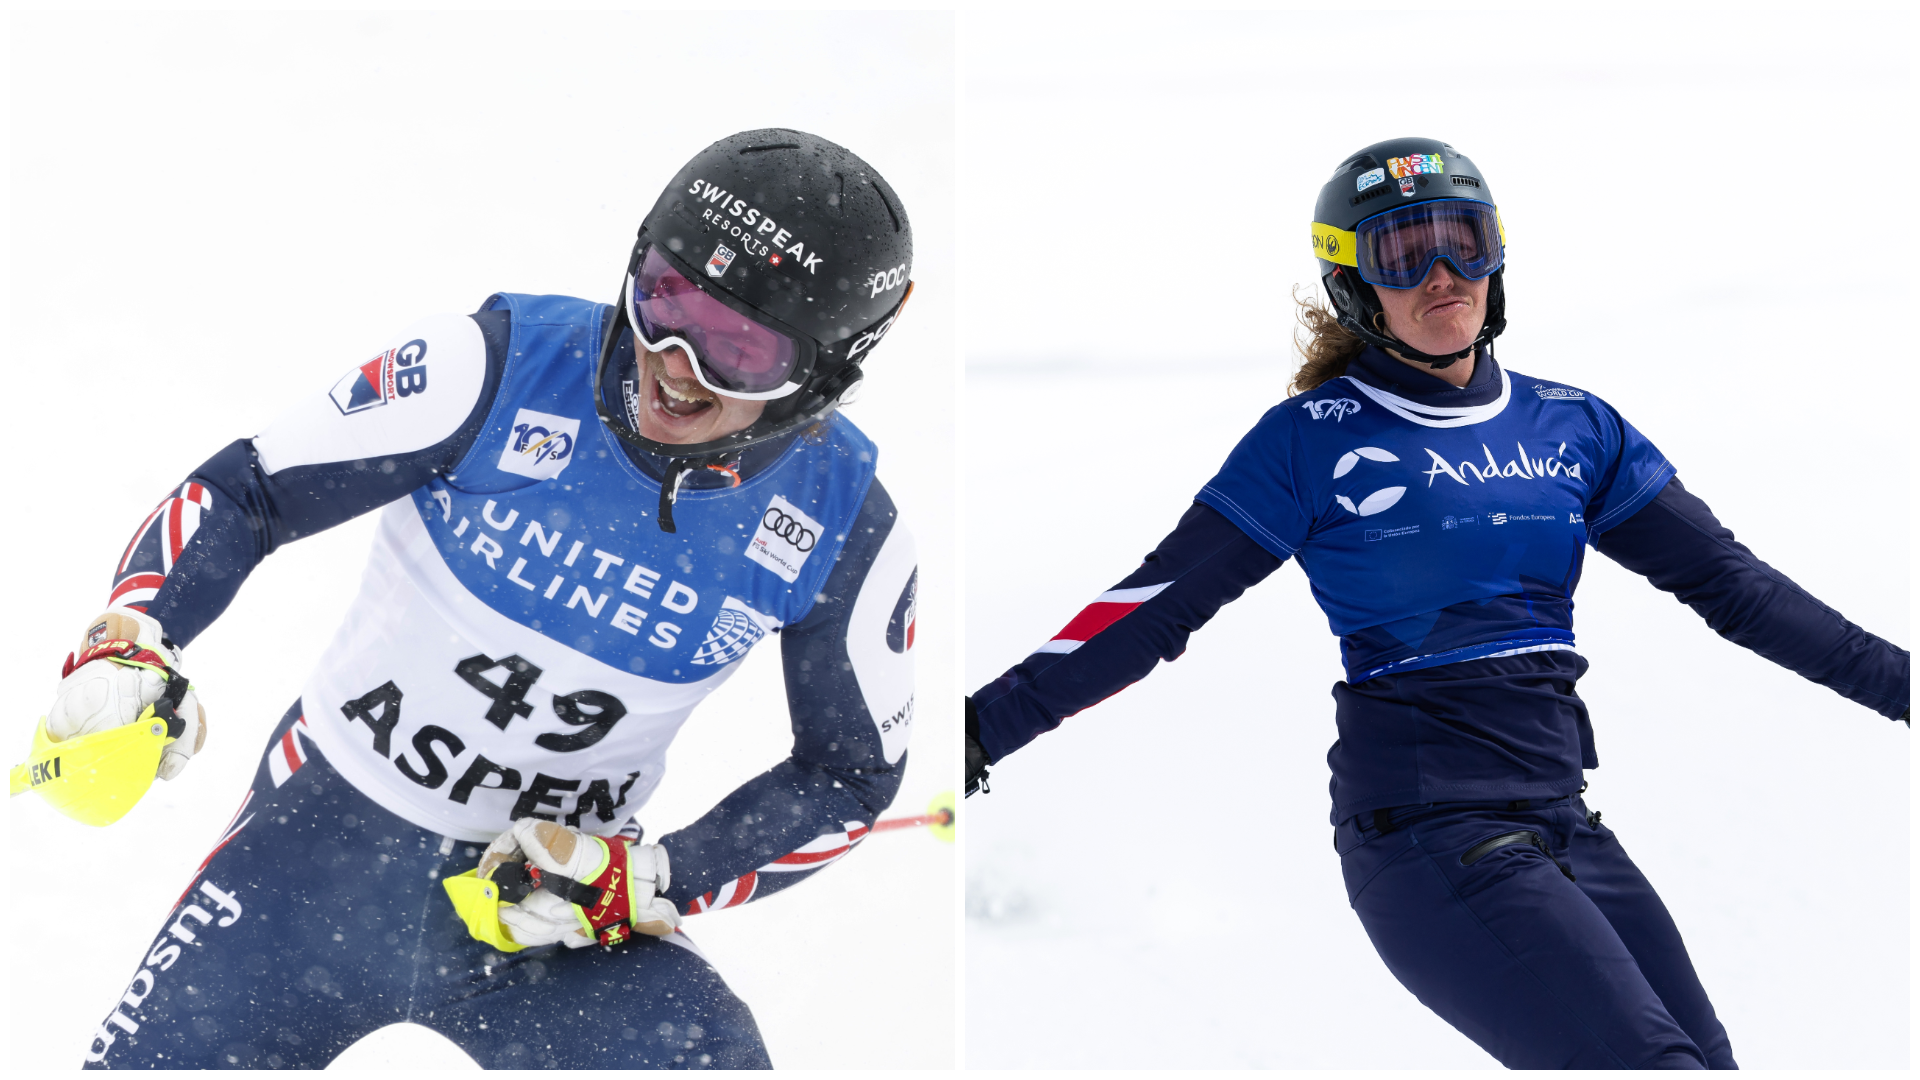 GBS Results Round-Up: Medals for Bankes, Slalom history made